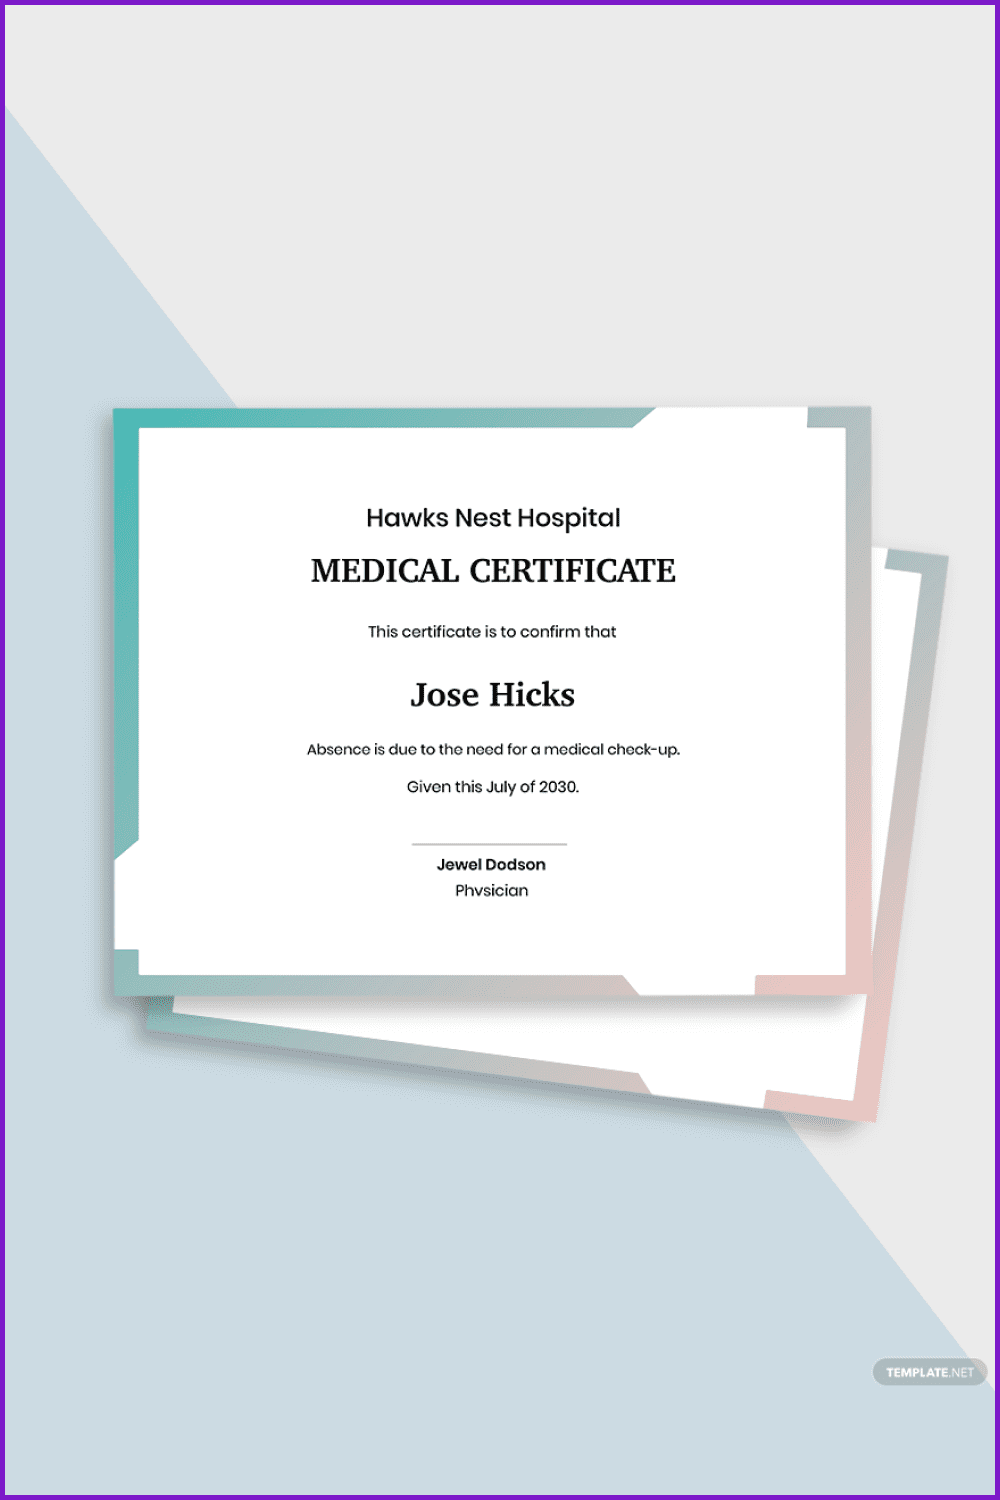 Medical Certificate Template for Absent.